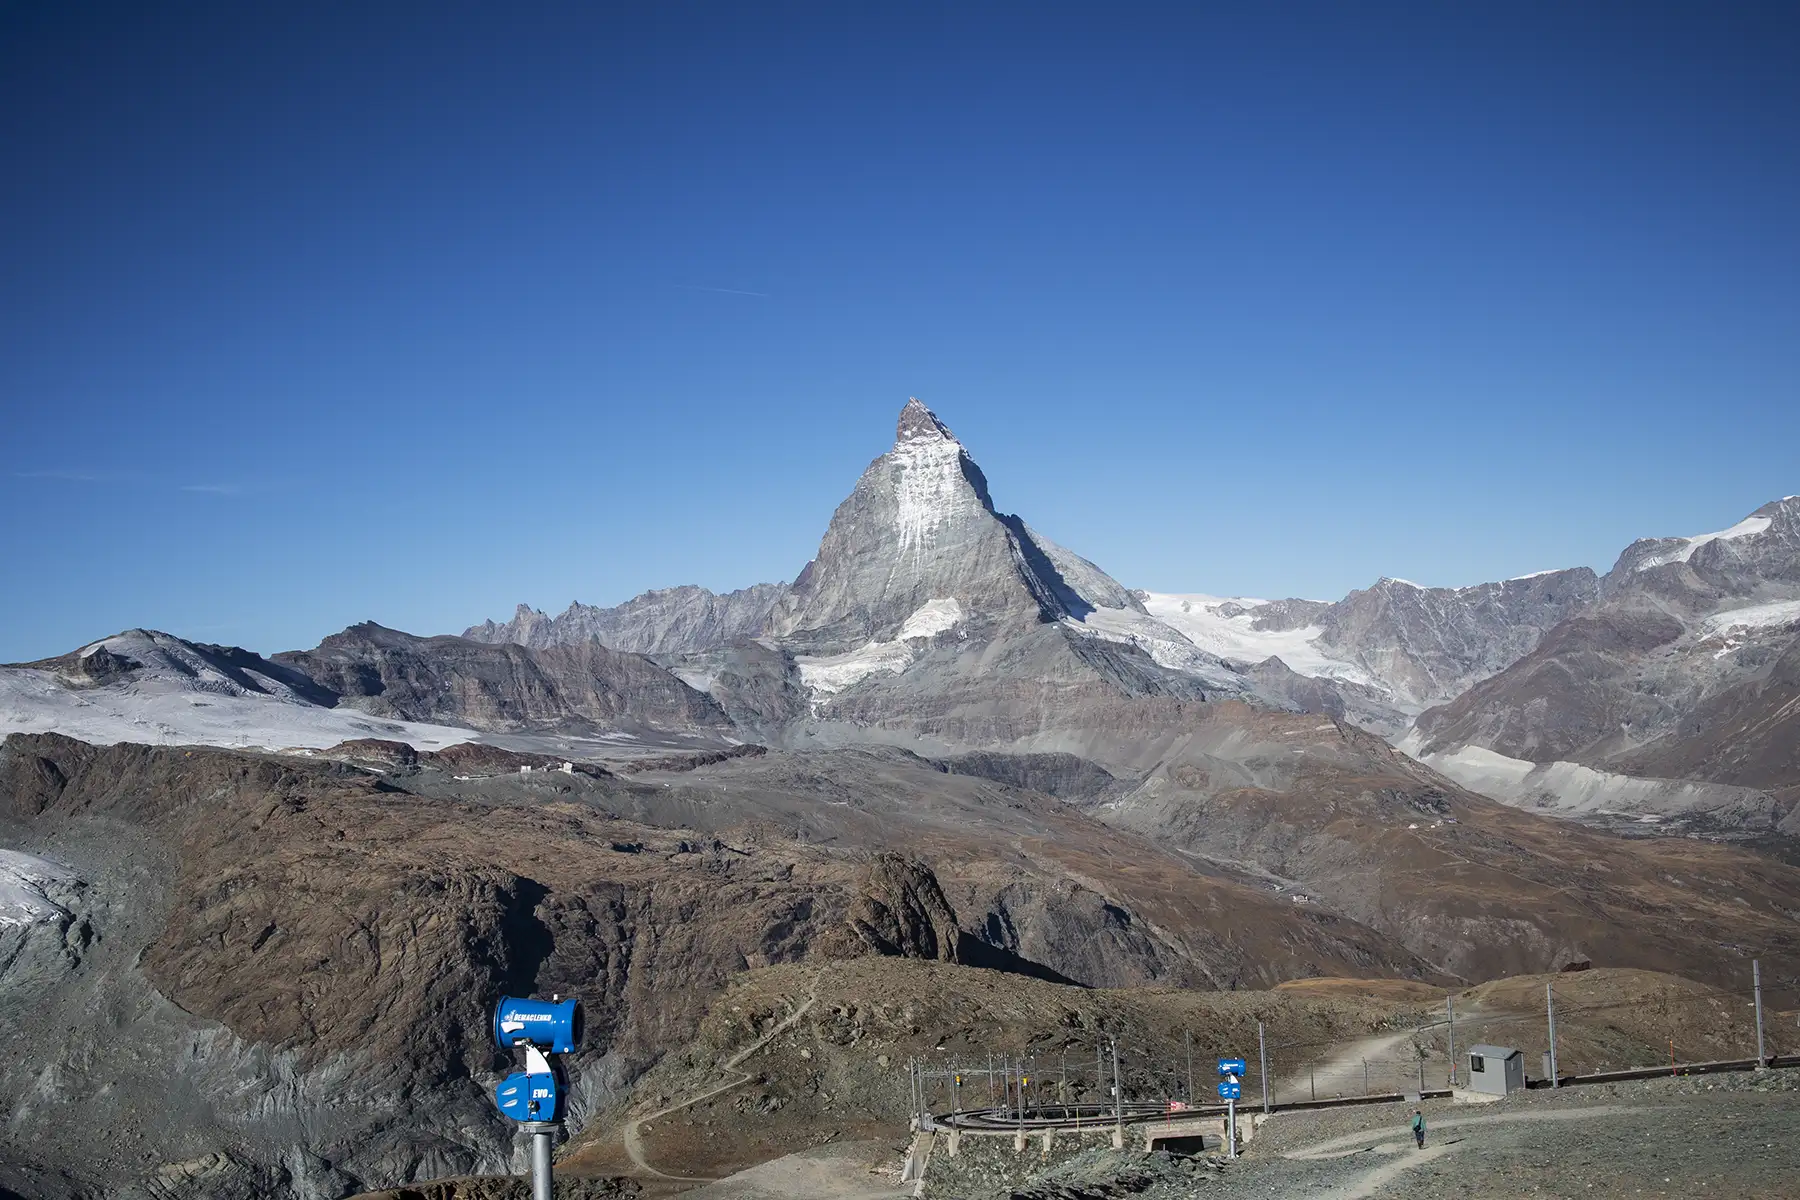 Jean-Claude Biver, the Matterhorn, and Carbon Fiber with Some